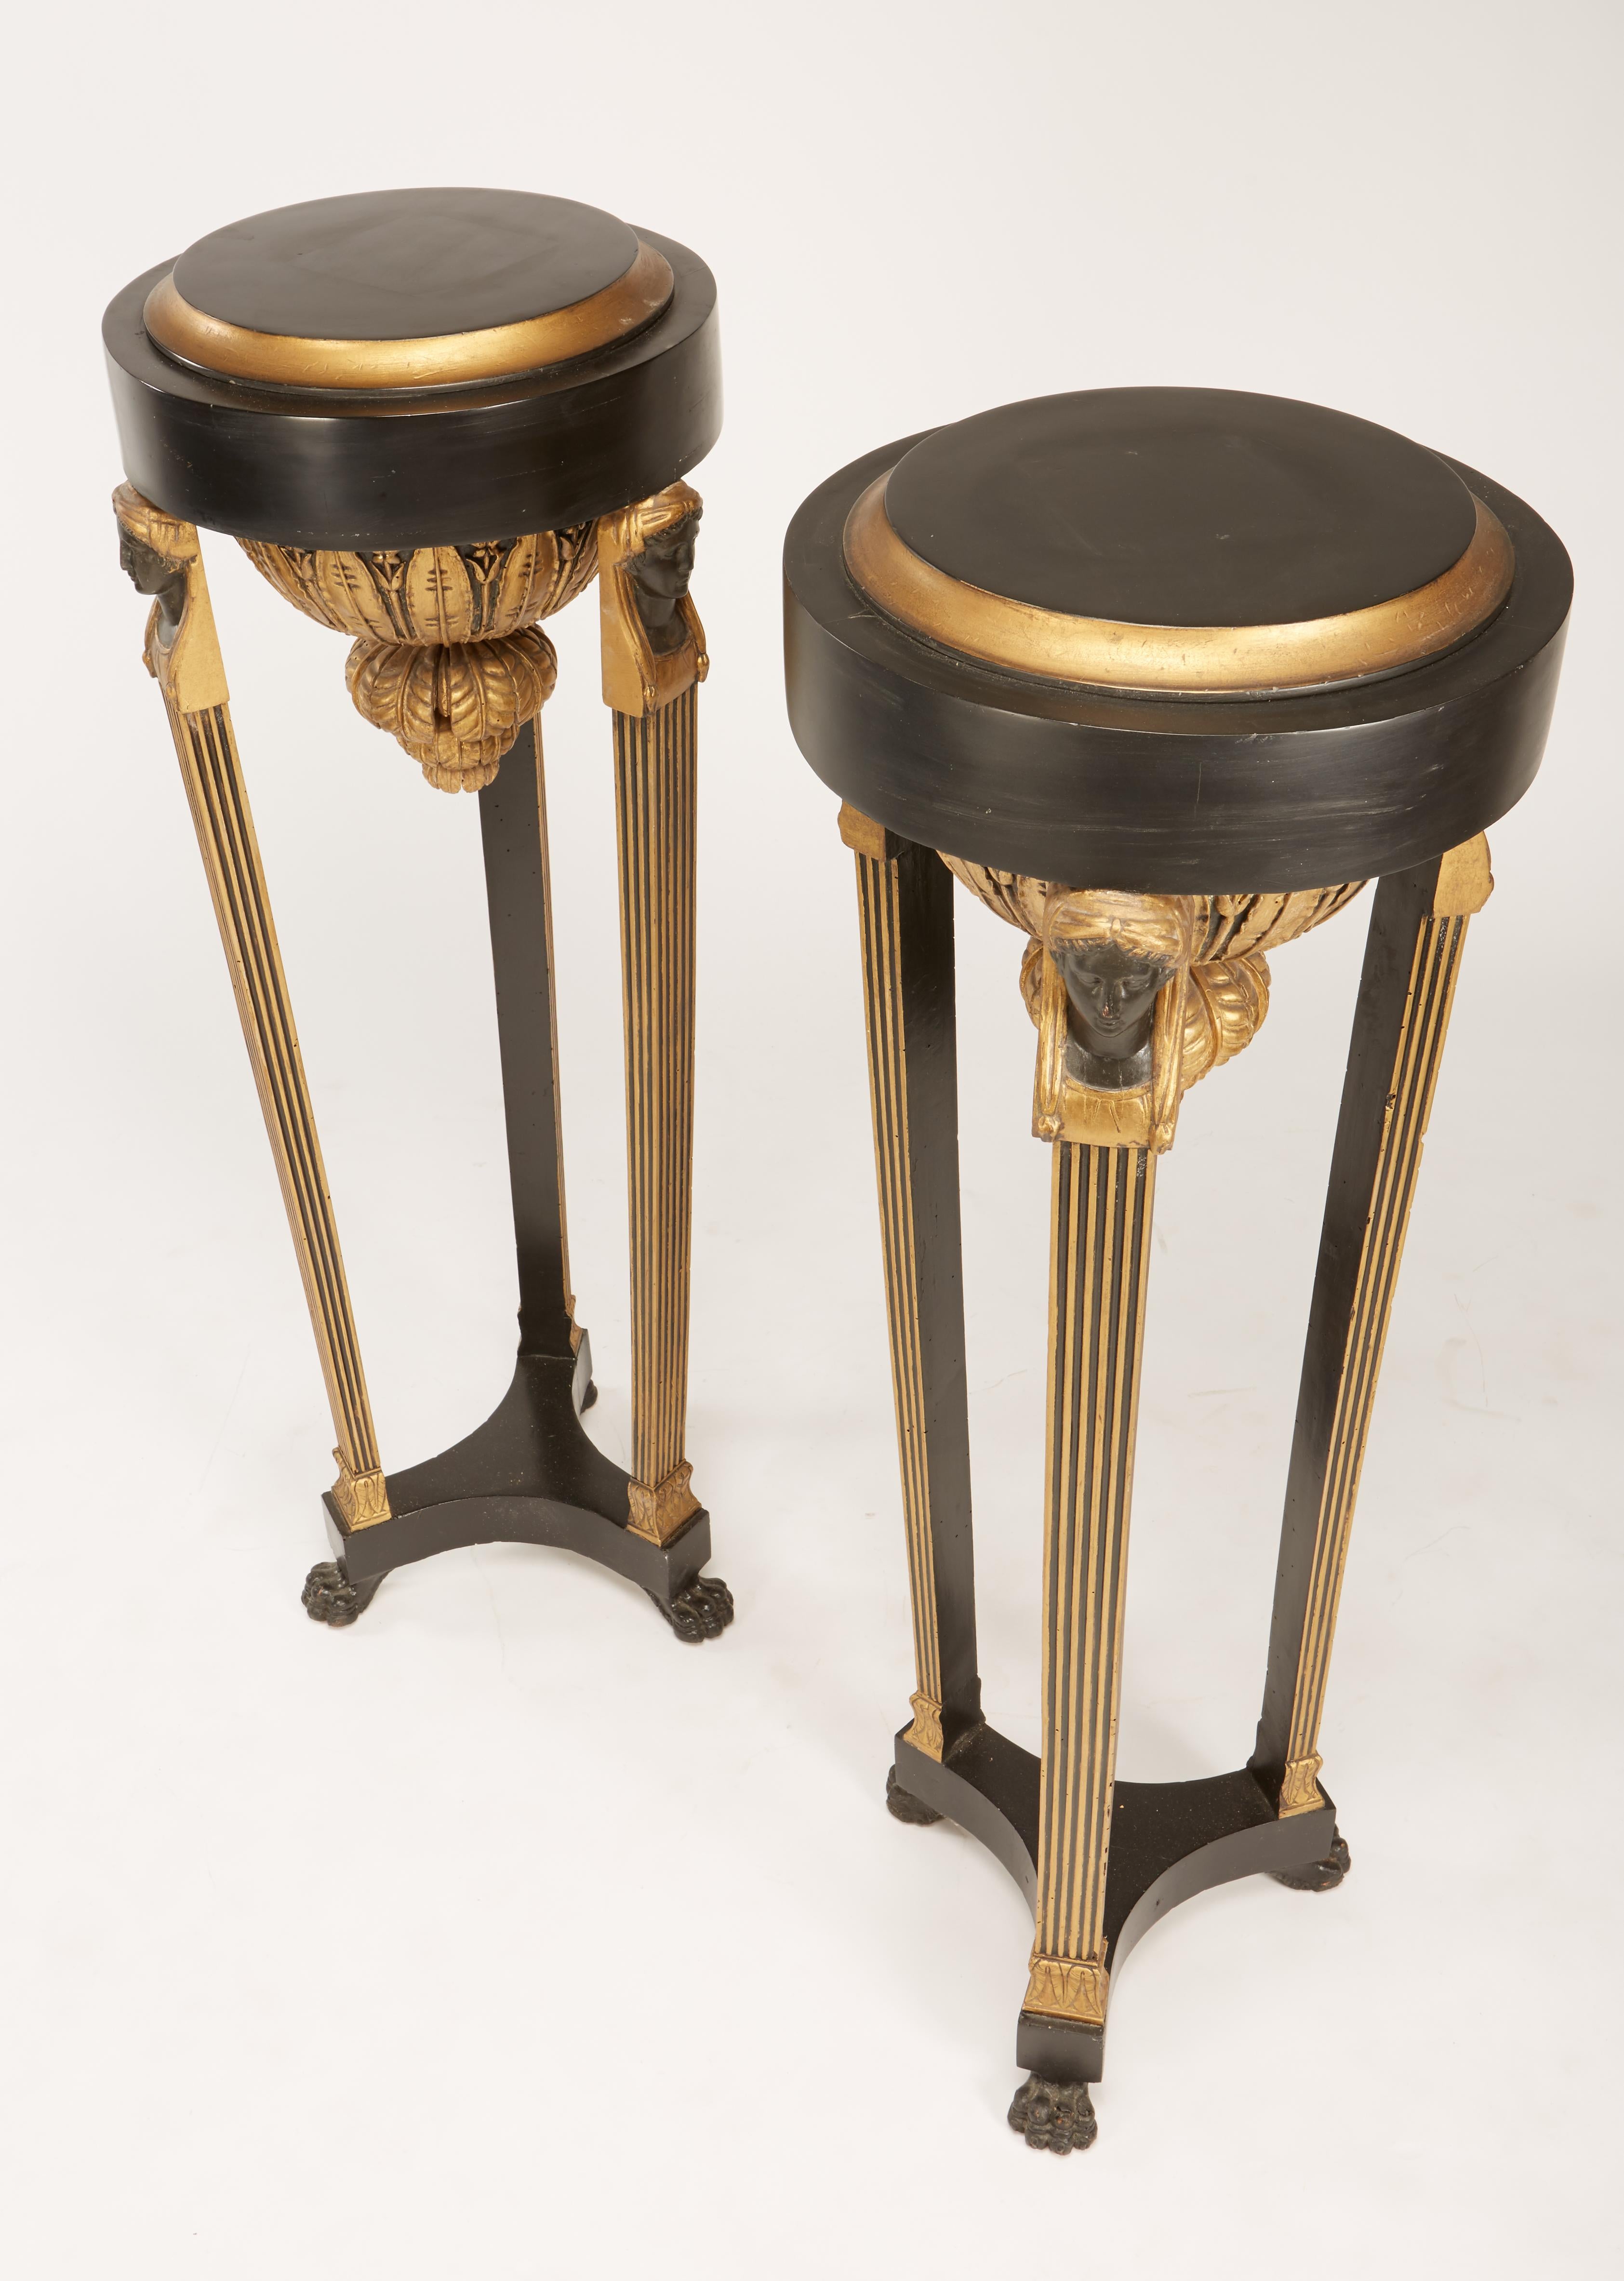 A fine matching pair of Continental Italian neoclassic black painted and parcel-gilt torcheres having urns with female bust on top of fluted legs on paw feet. Later tops, top diameter is 13.5